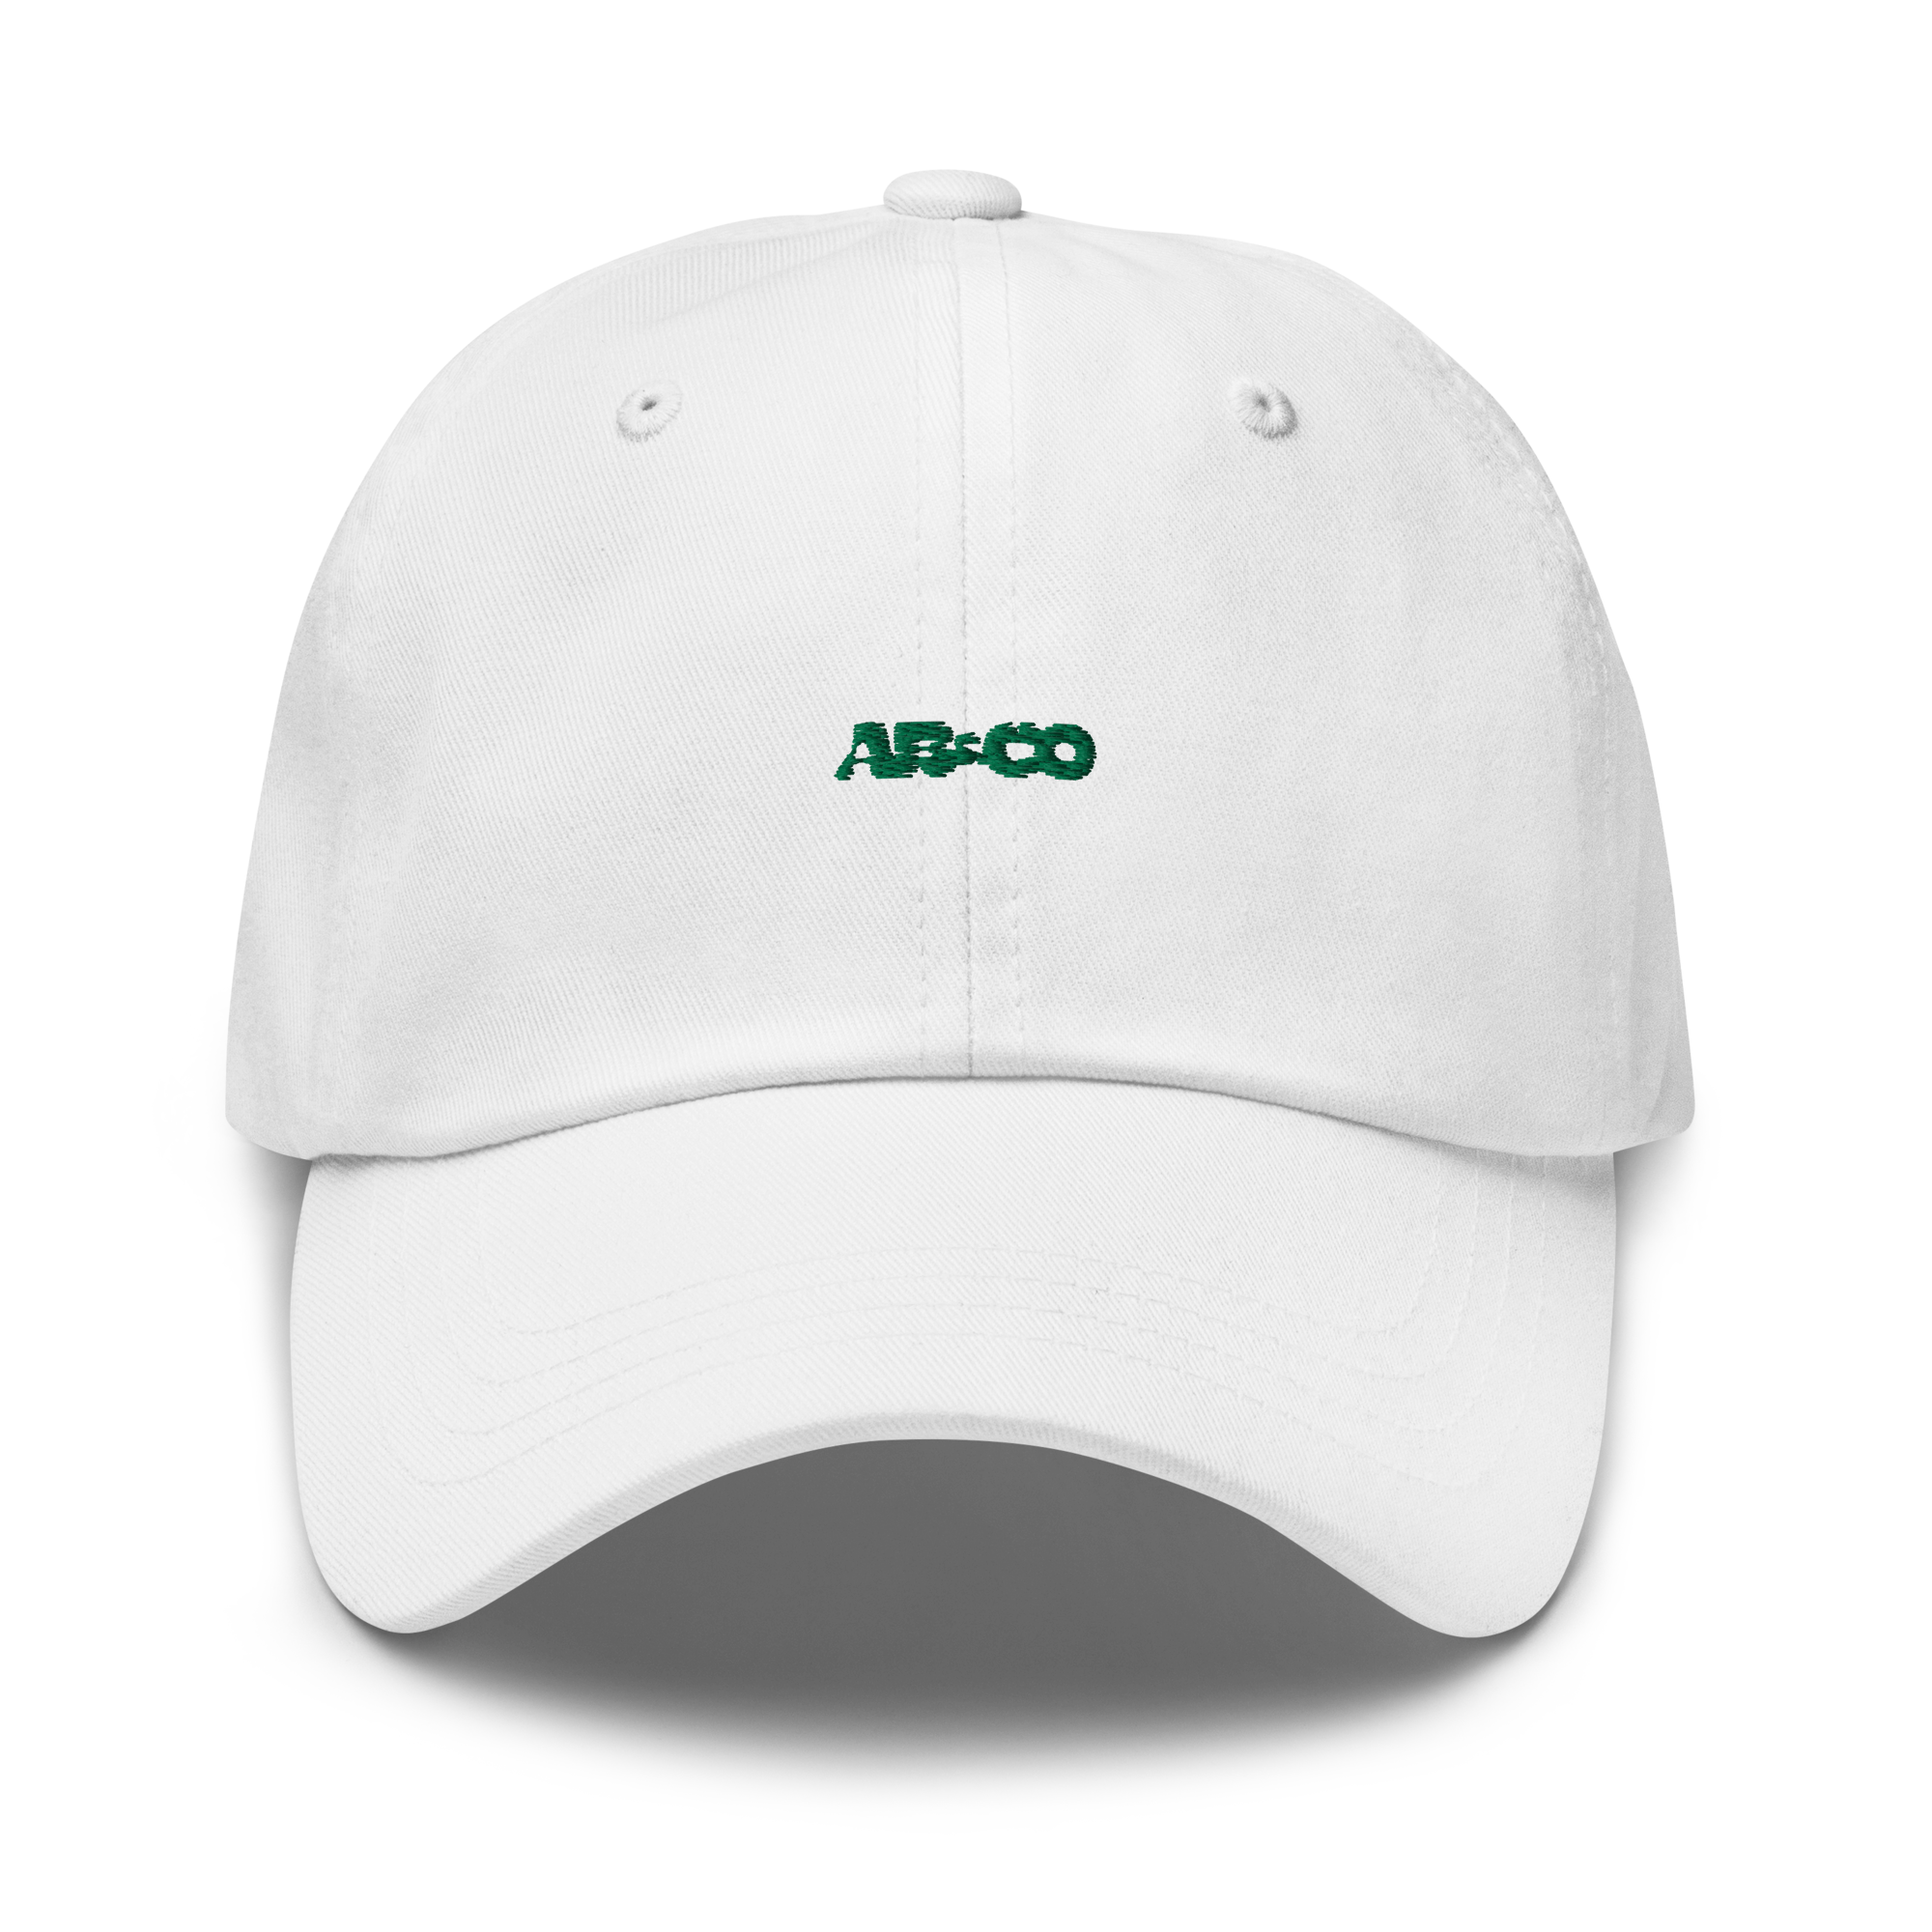 AB&CO Embroidered Dad hat